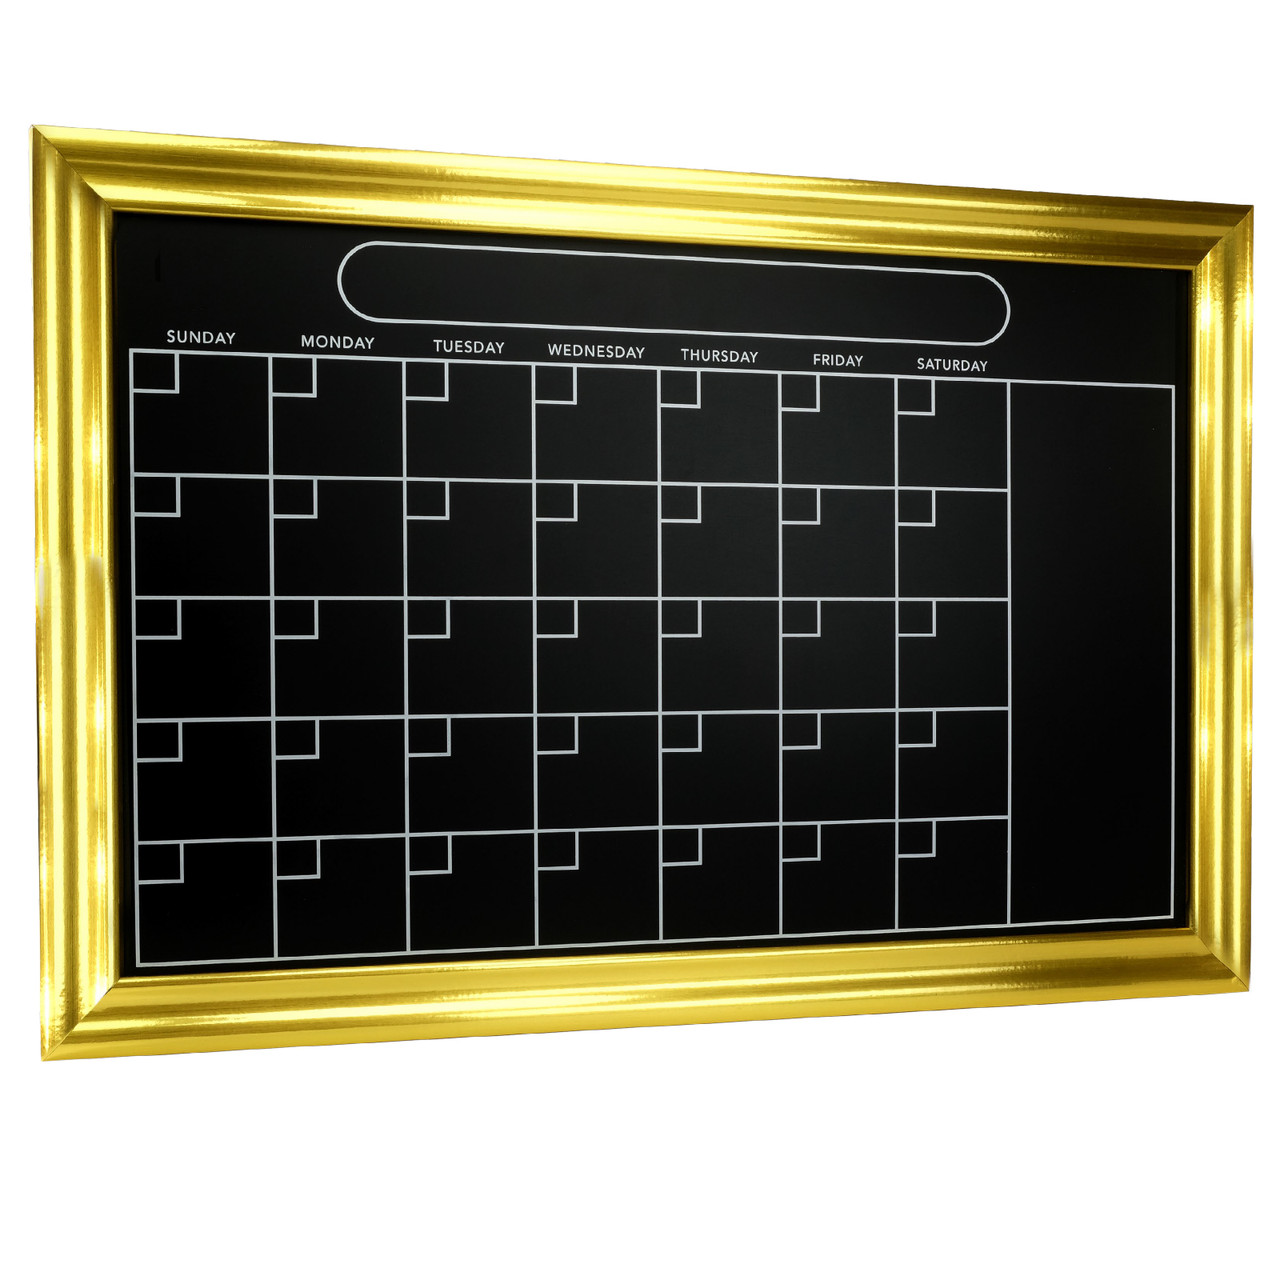 Excello Global Products Gold Magnetic Wall Chalkboard Calendar: Includes Chalk and Magnetic Eraser 20 inchx30 inch Hanging Chalk Sign for Kitchen Wall